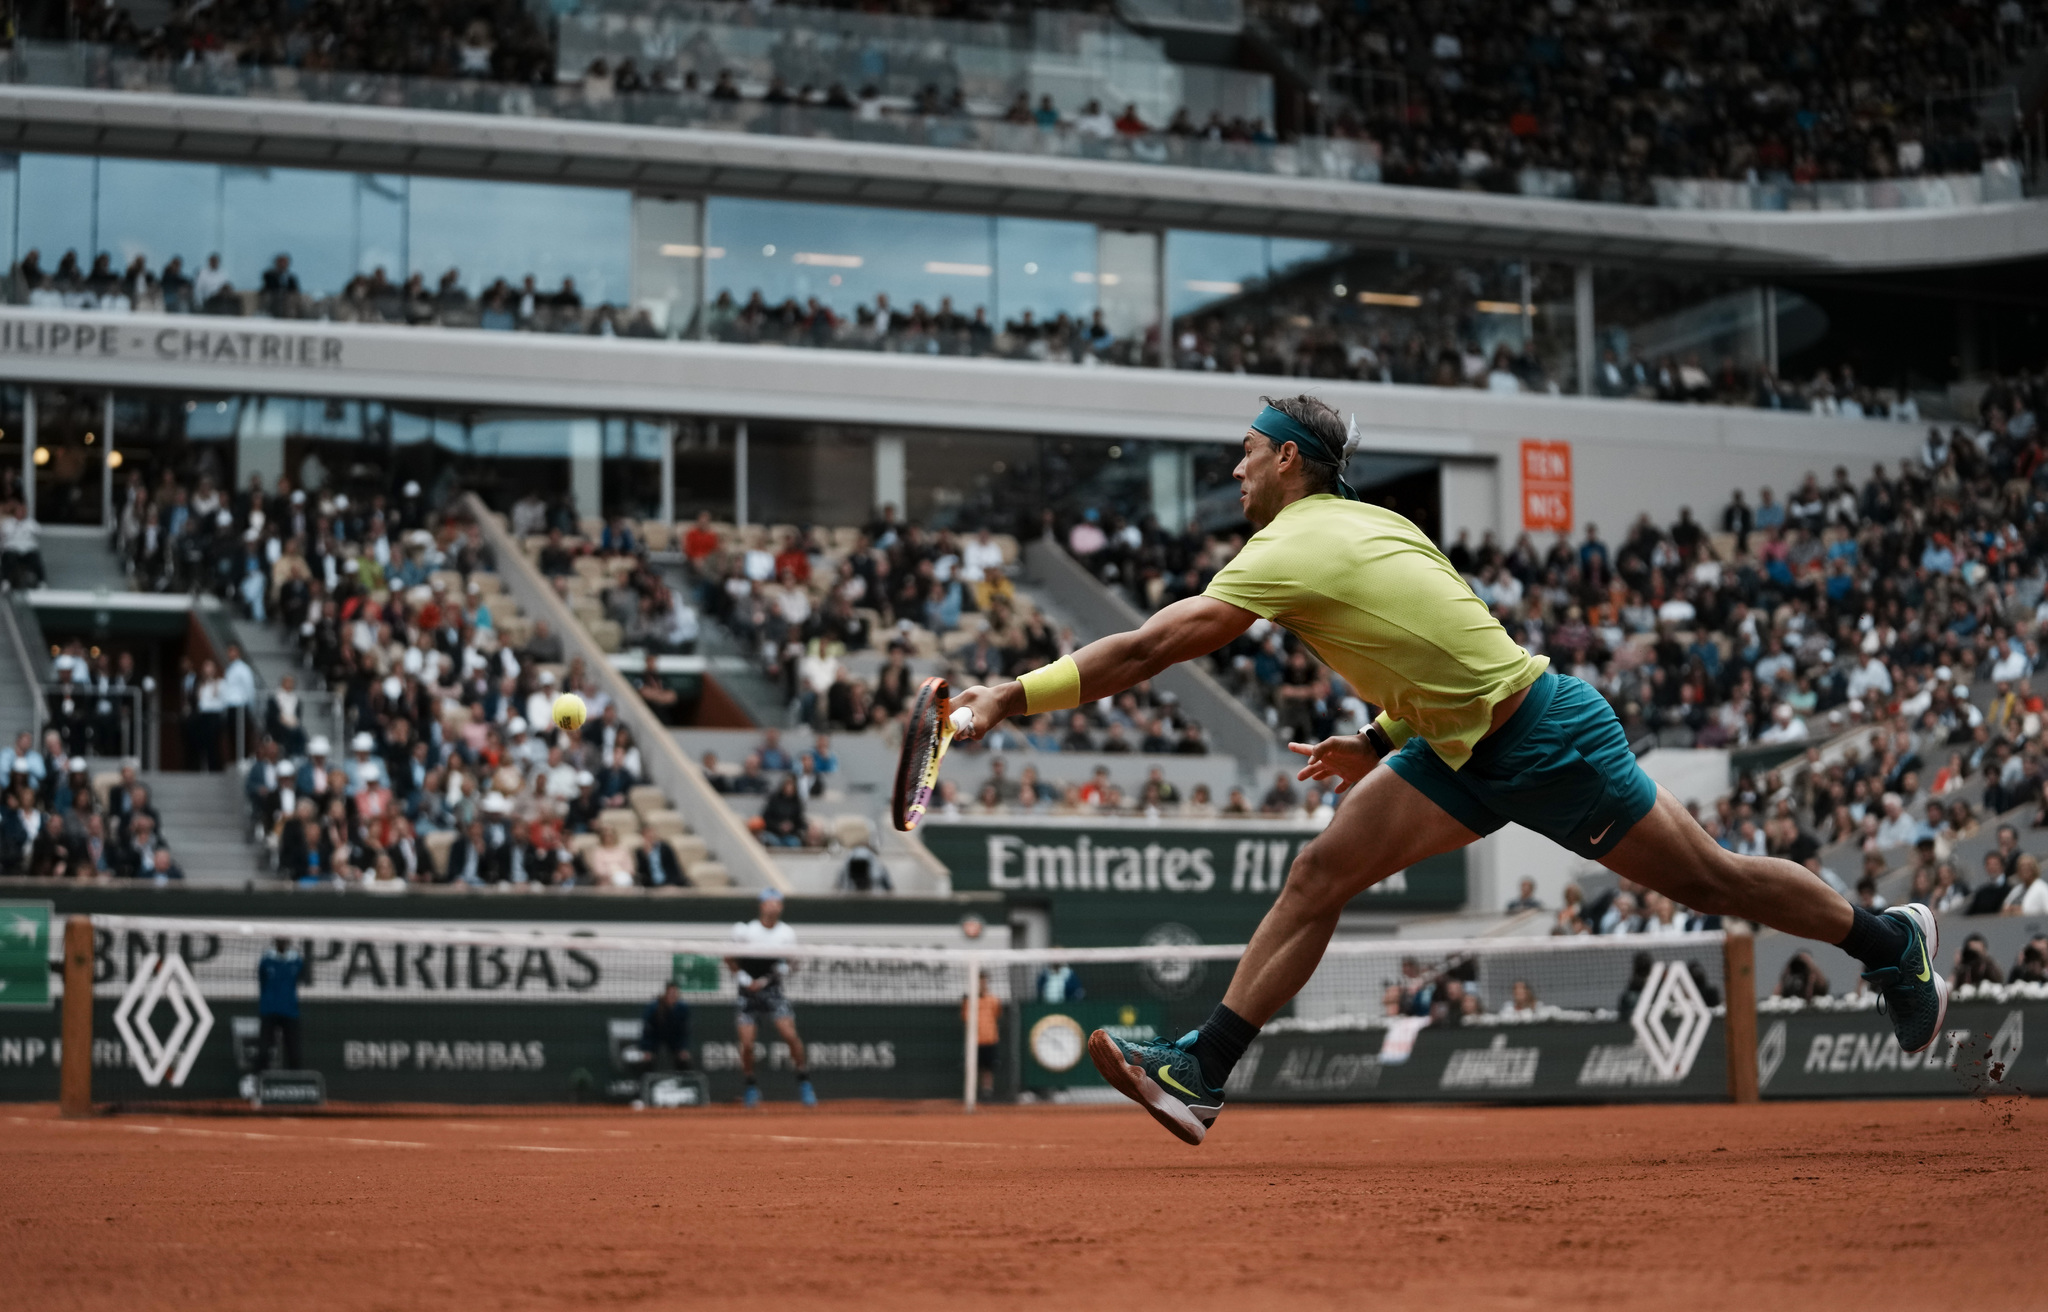 Spain's Rafael  lt;HIT gt;Nadal lt;/HIT gt; plays a shot against Australia's Jordan Thompson during their first round match at the French Open tennis tournament in Roland Garros stadium in Paris, France, Monday, May 23, 2022. (AP Photo/Thibault Camus)